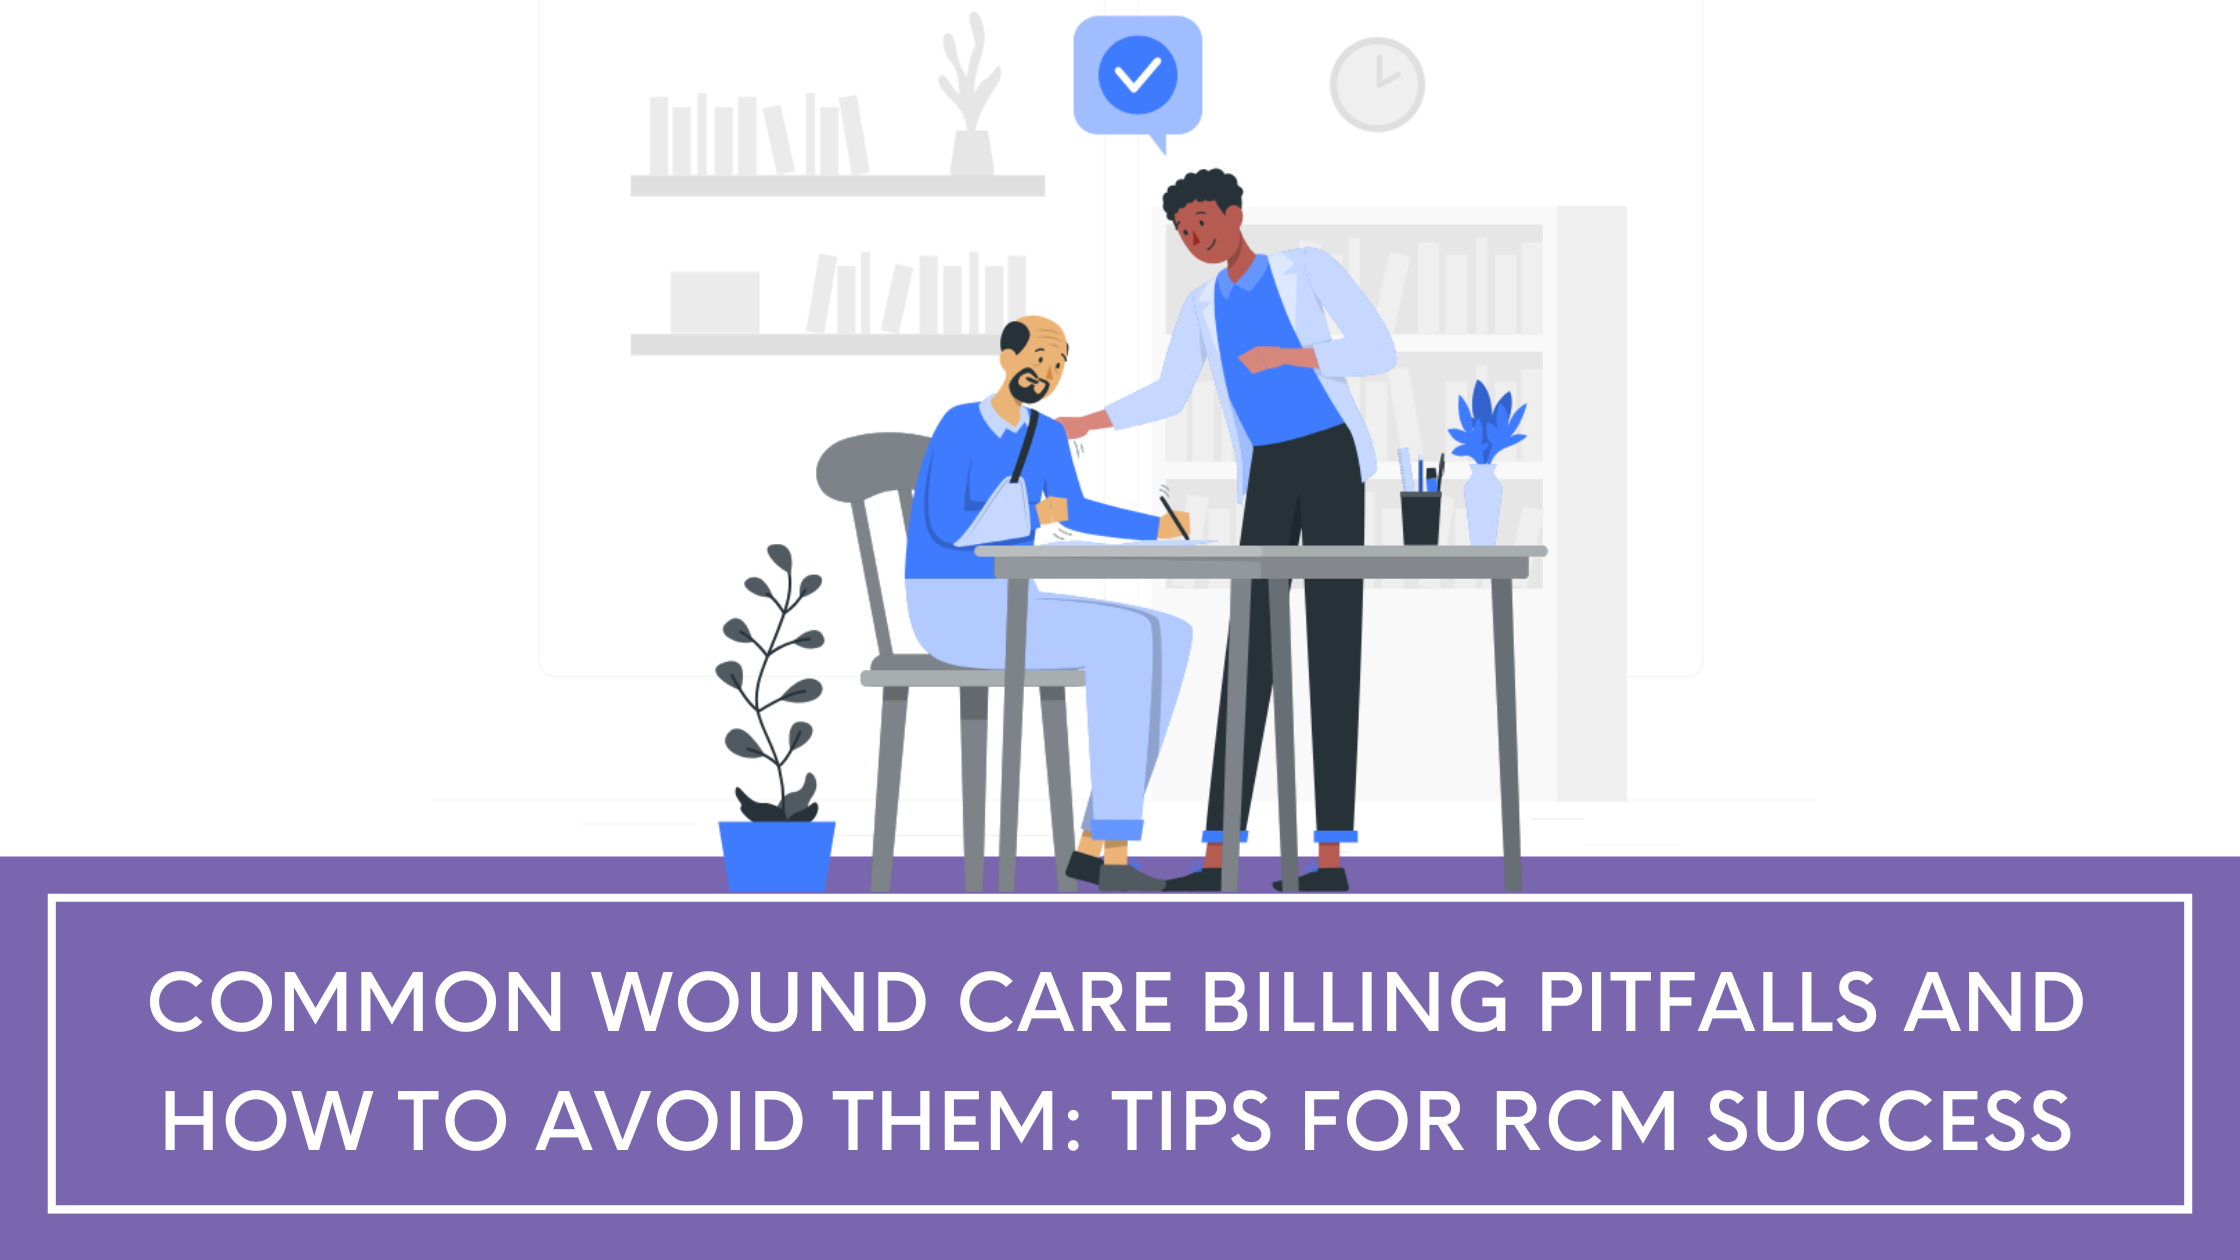 Wound Care Billing Pitfalls and Tips for RCM Success